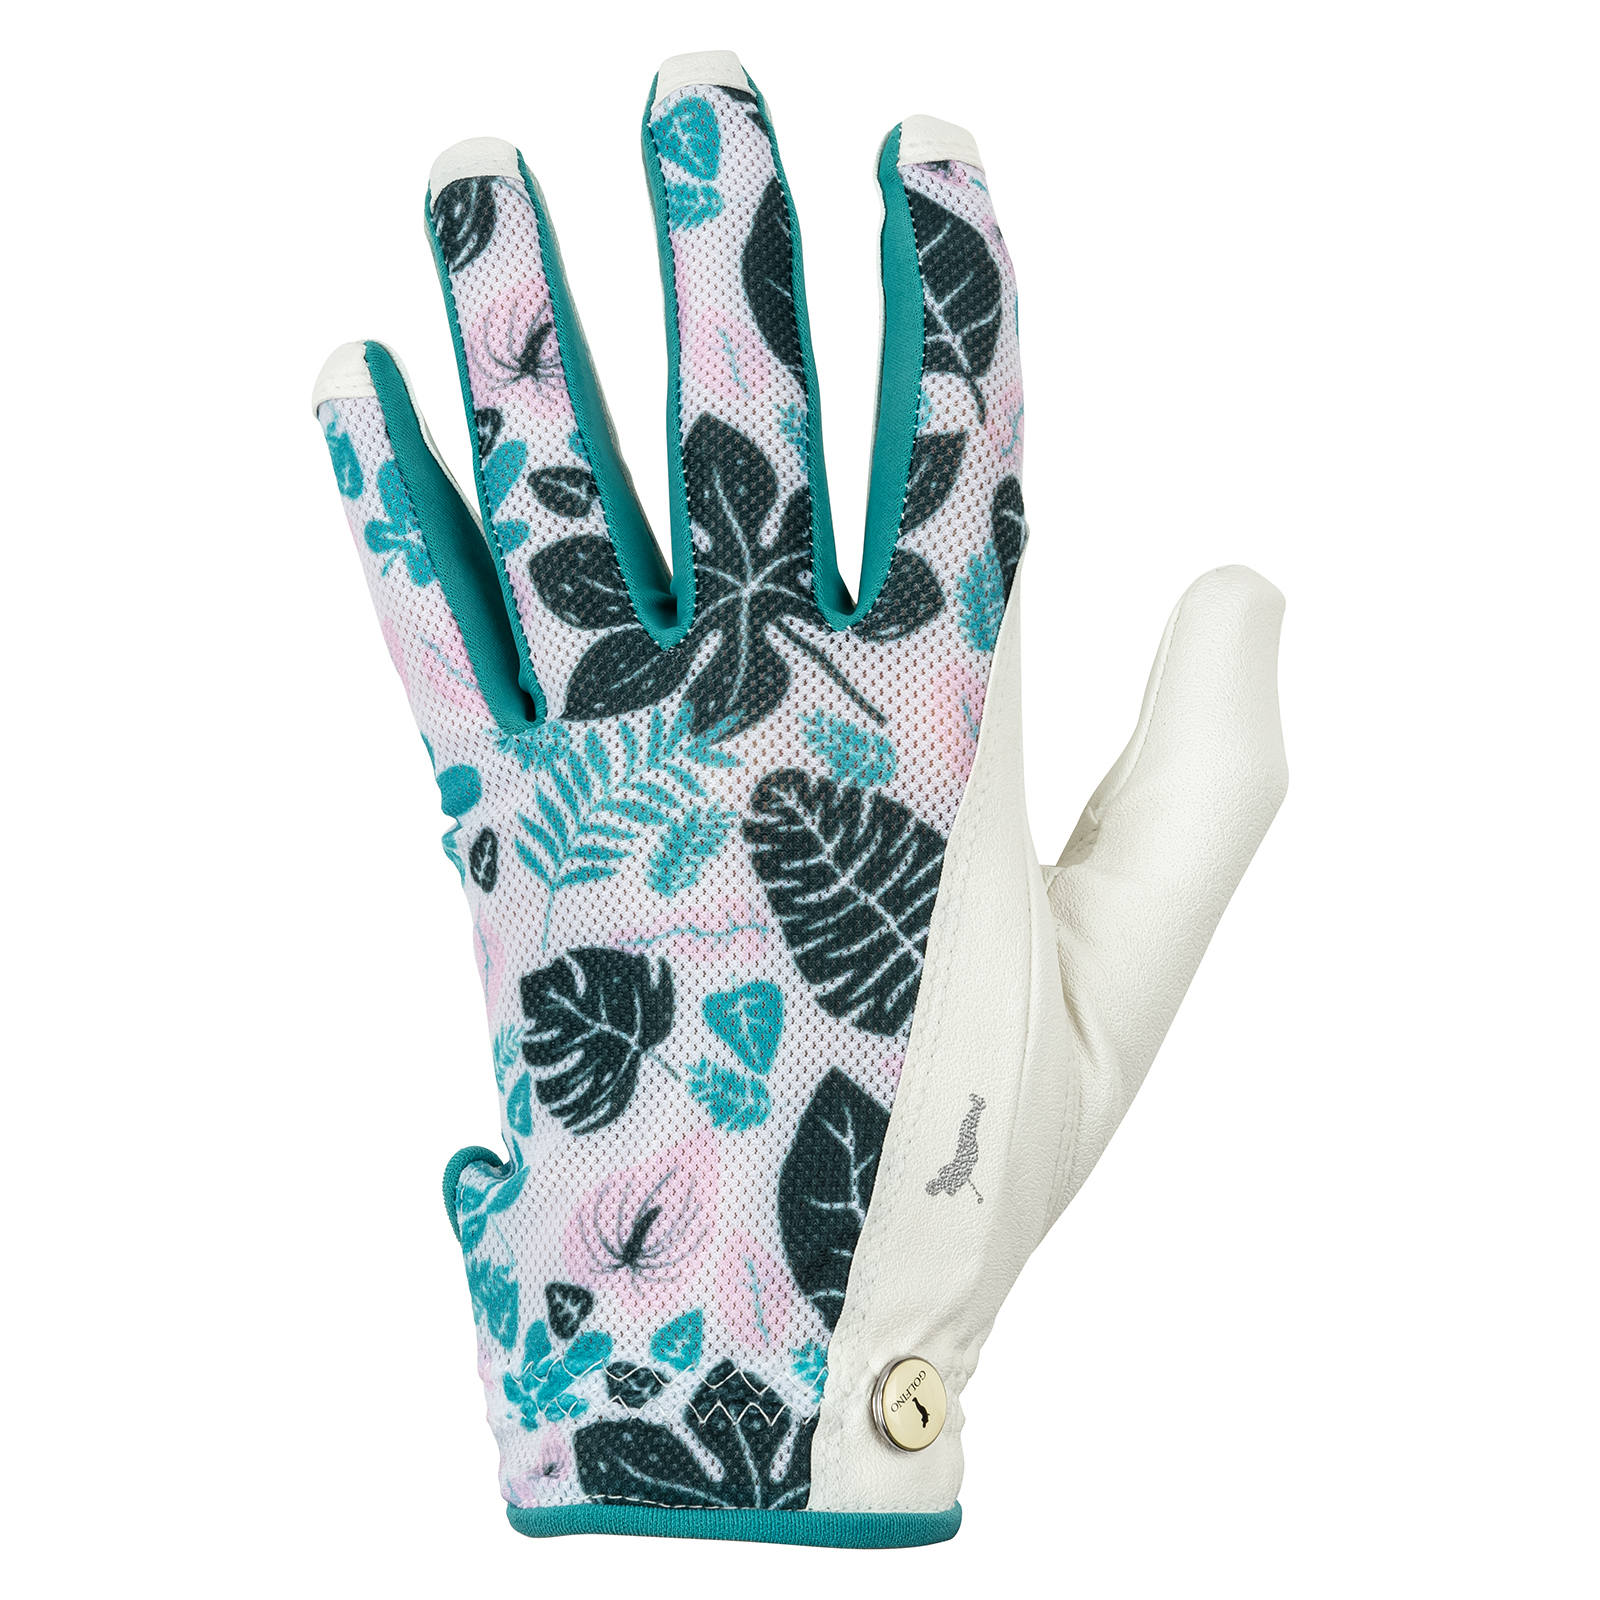 Durable and comfortable ladies' gloves